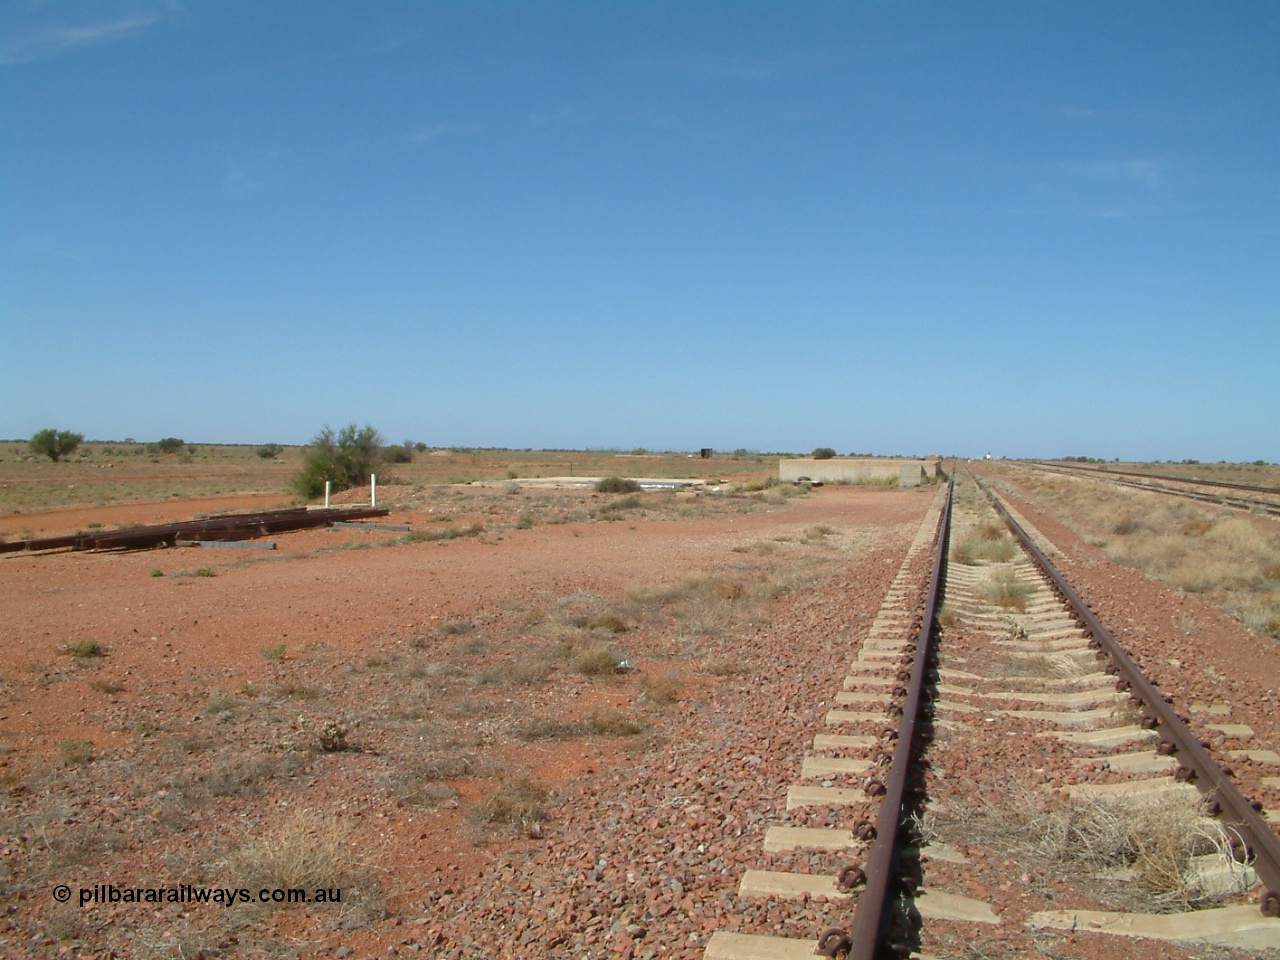 030416 110102
Manguri Siding, looking south along the third road or goods siding, loading platform, located 706.5 km from the 0 datum at Coonamia and 200 km north of Tarcoola between Wirrida and Cadney Park on the Tarcoola - Alice Springs line. [url=https://goo.gl/maps/y8coKnvDBraSuT8G7]GeoData location[/url]. 16th April 2003.
